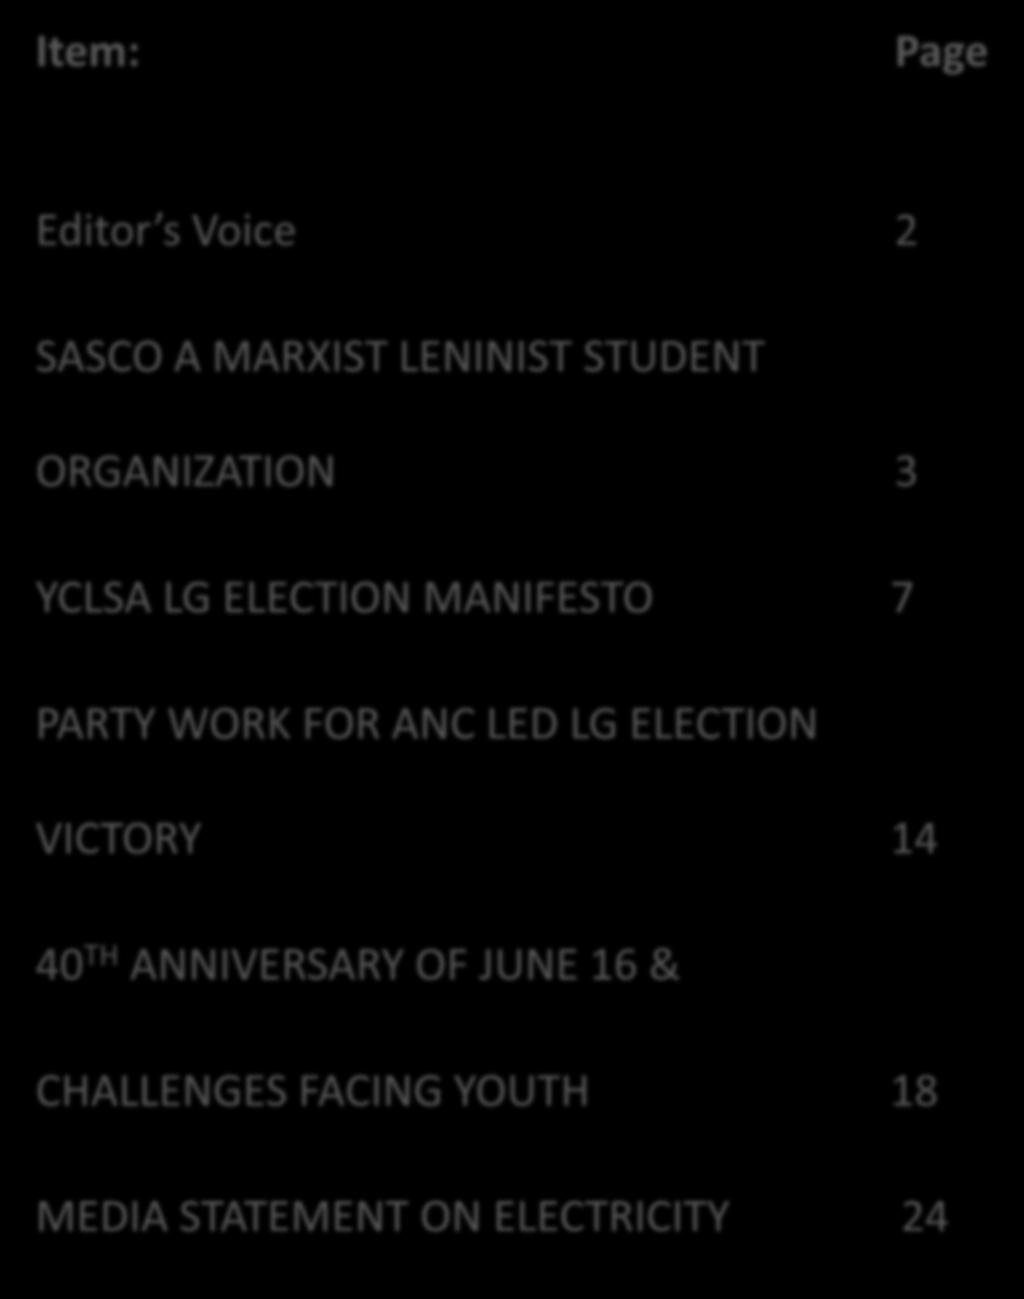 Contents Item: Page Editor s Voice 2 SASCO A MARXIST LENINIST STUDENT ORGANIZATION 3 YCLSA LG ELECTION MANIFESTO 7 PARTY WORK